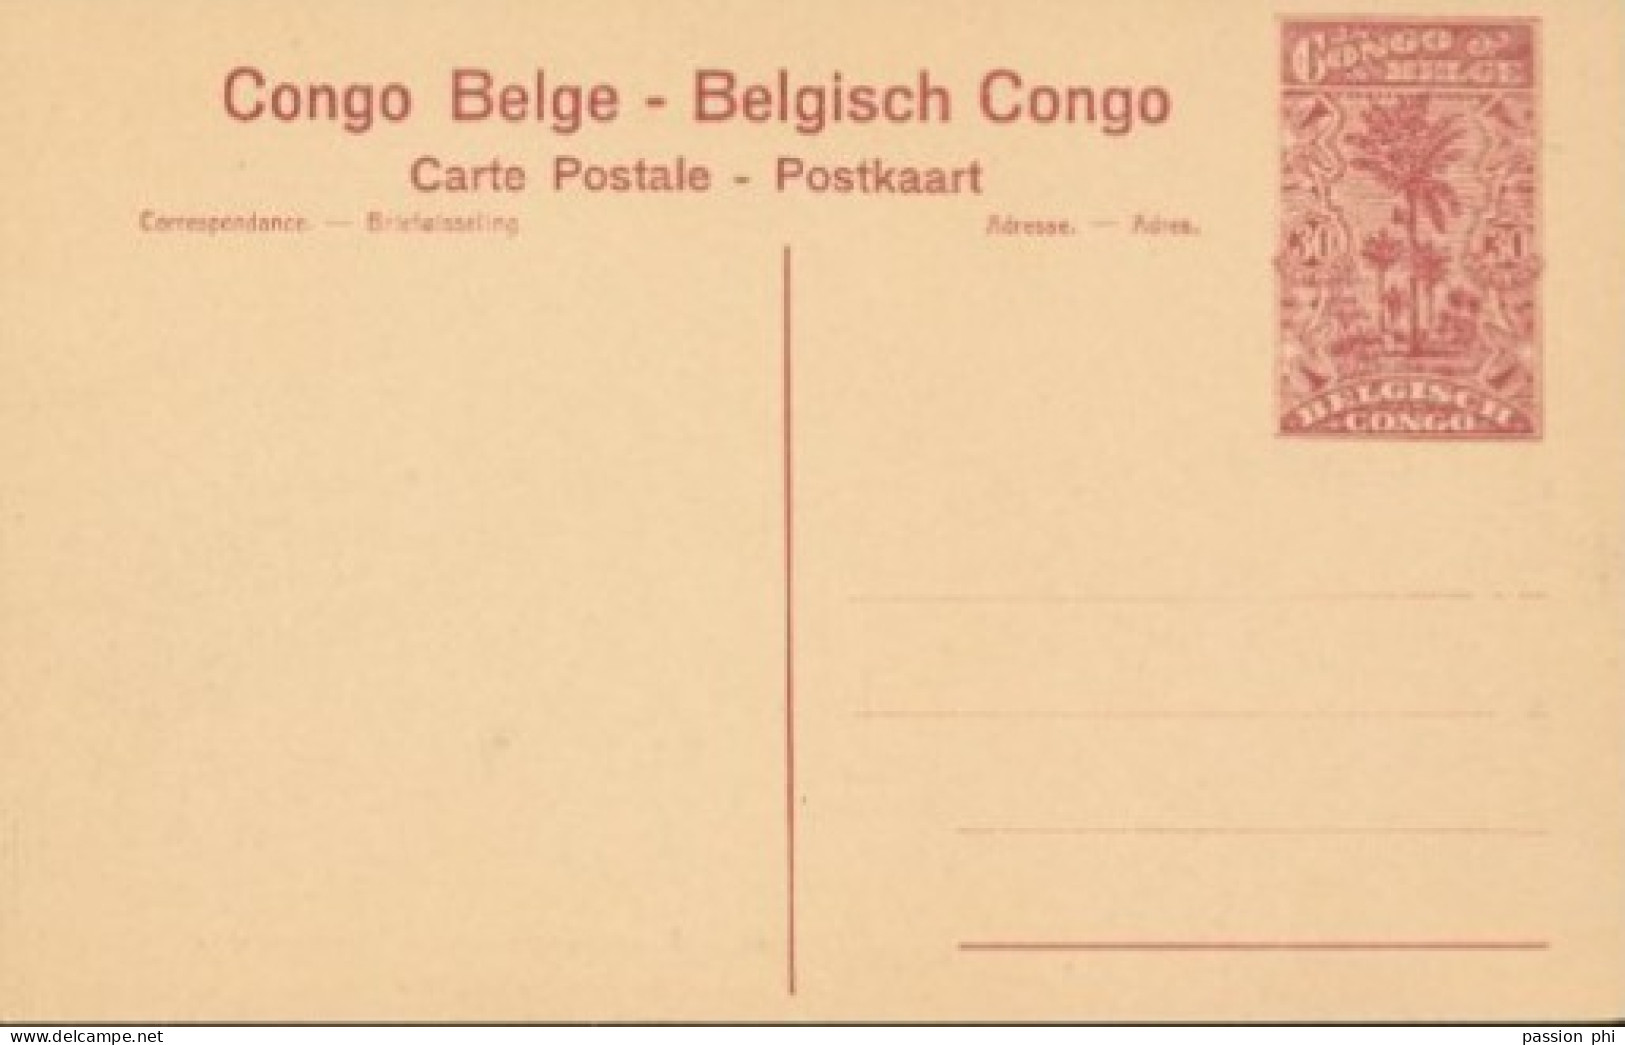 ZAC BELGIAN CONGO PPS SBEP 62 VIEW 81 UNUSED - Stamped Stationery